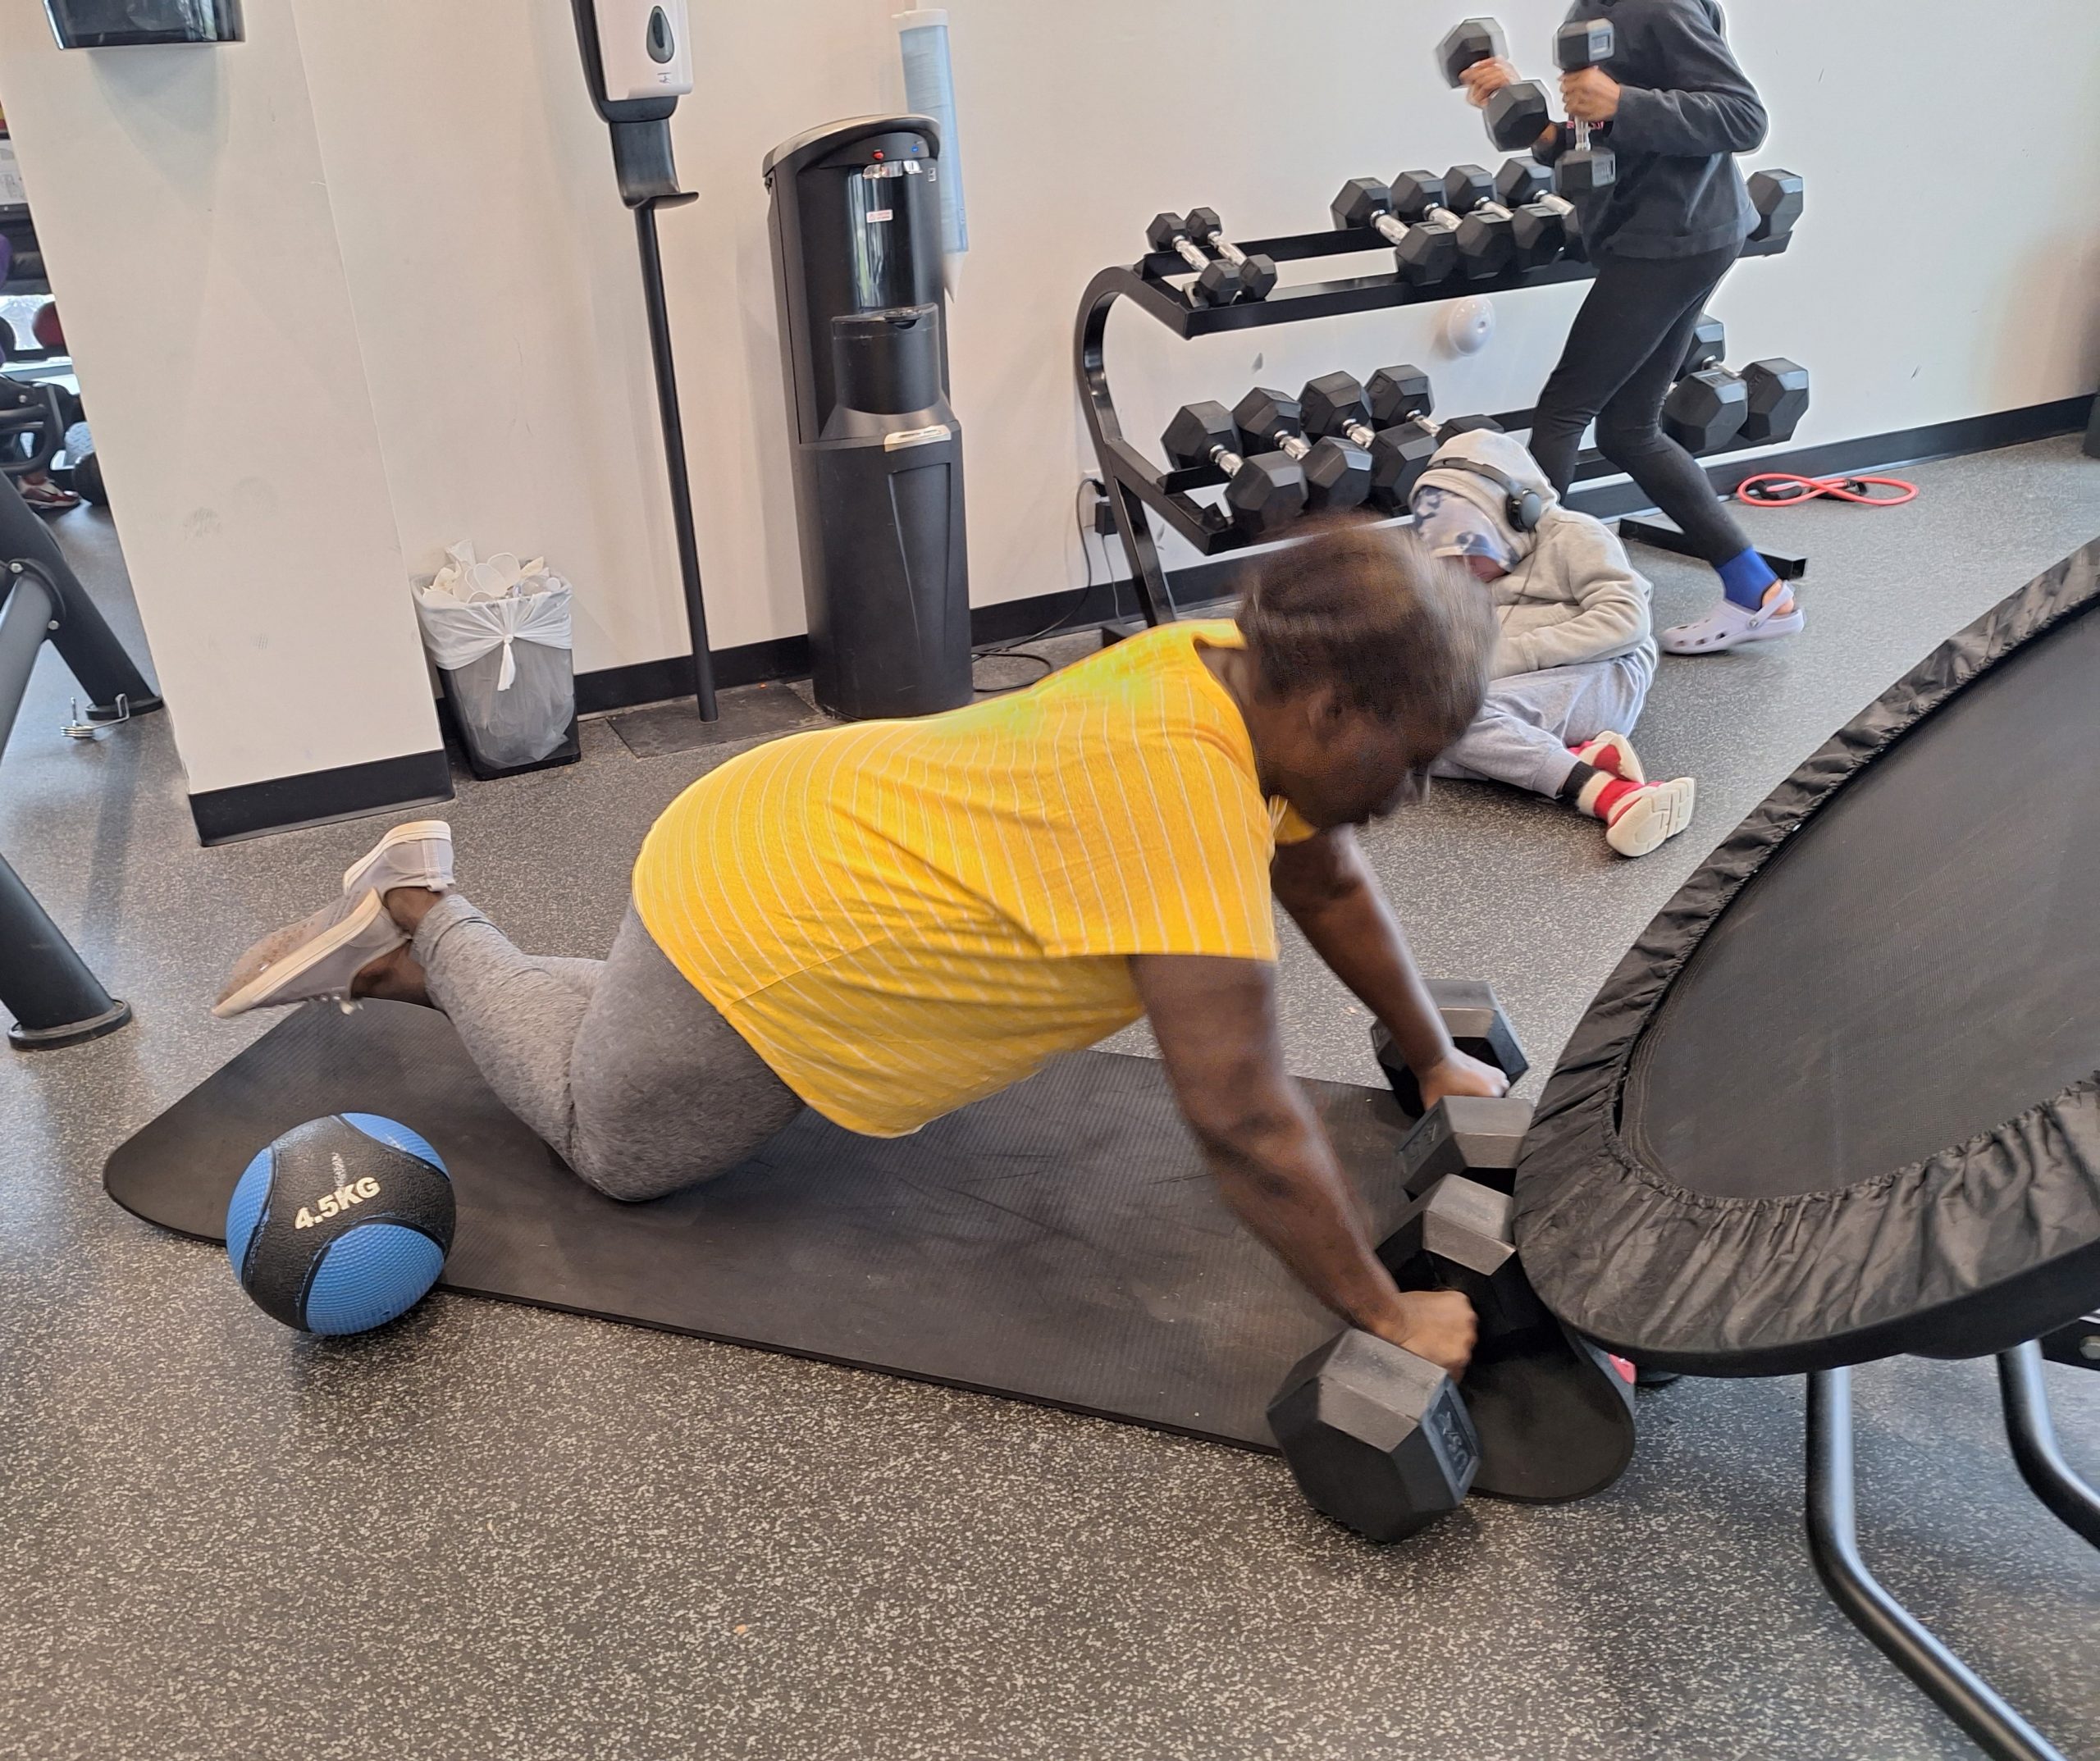 Monique working out